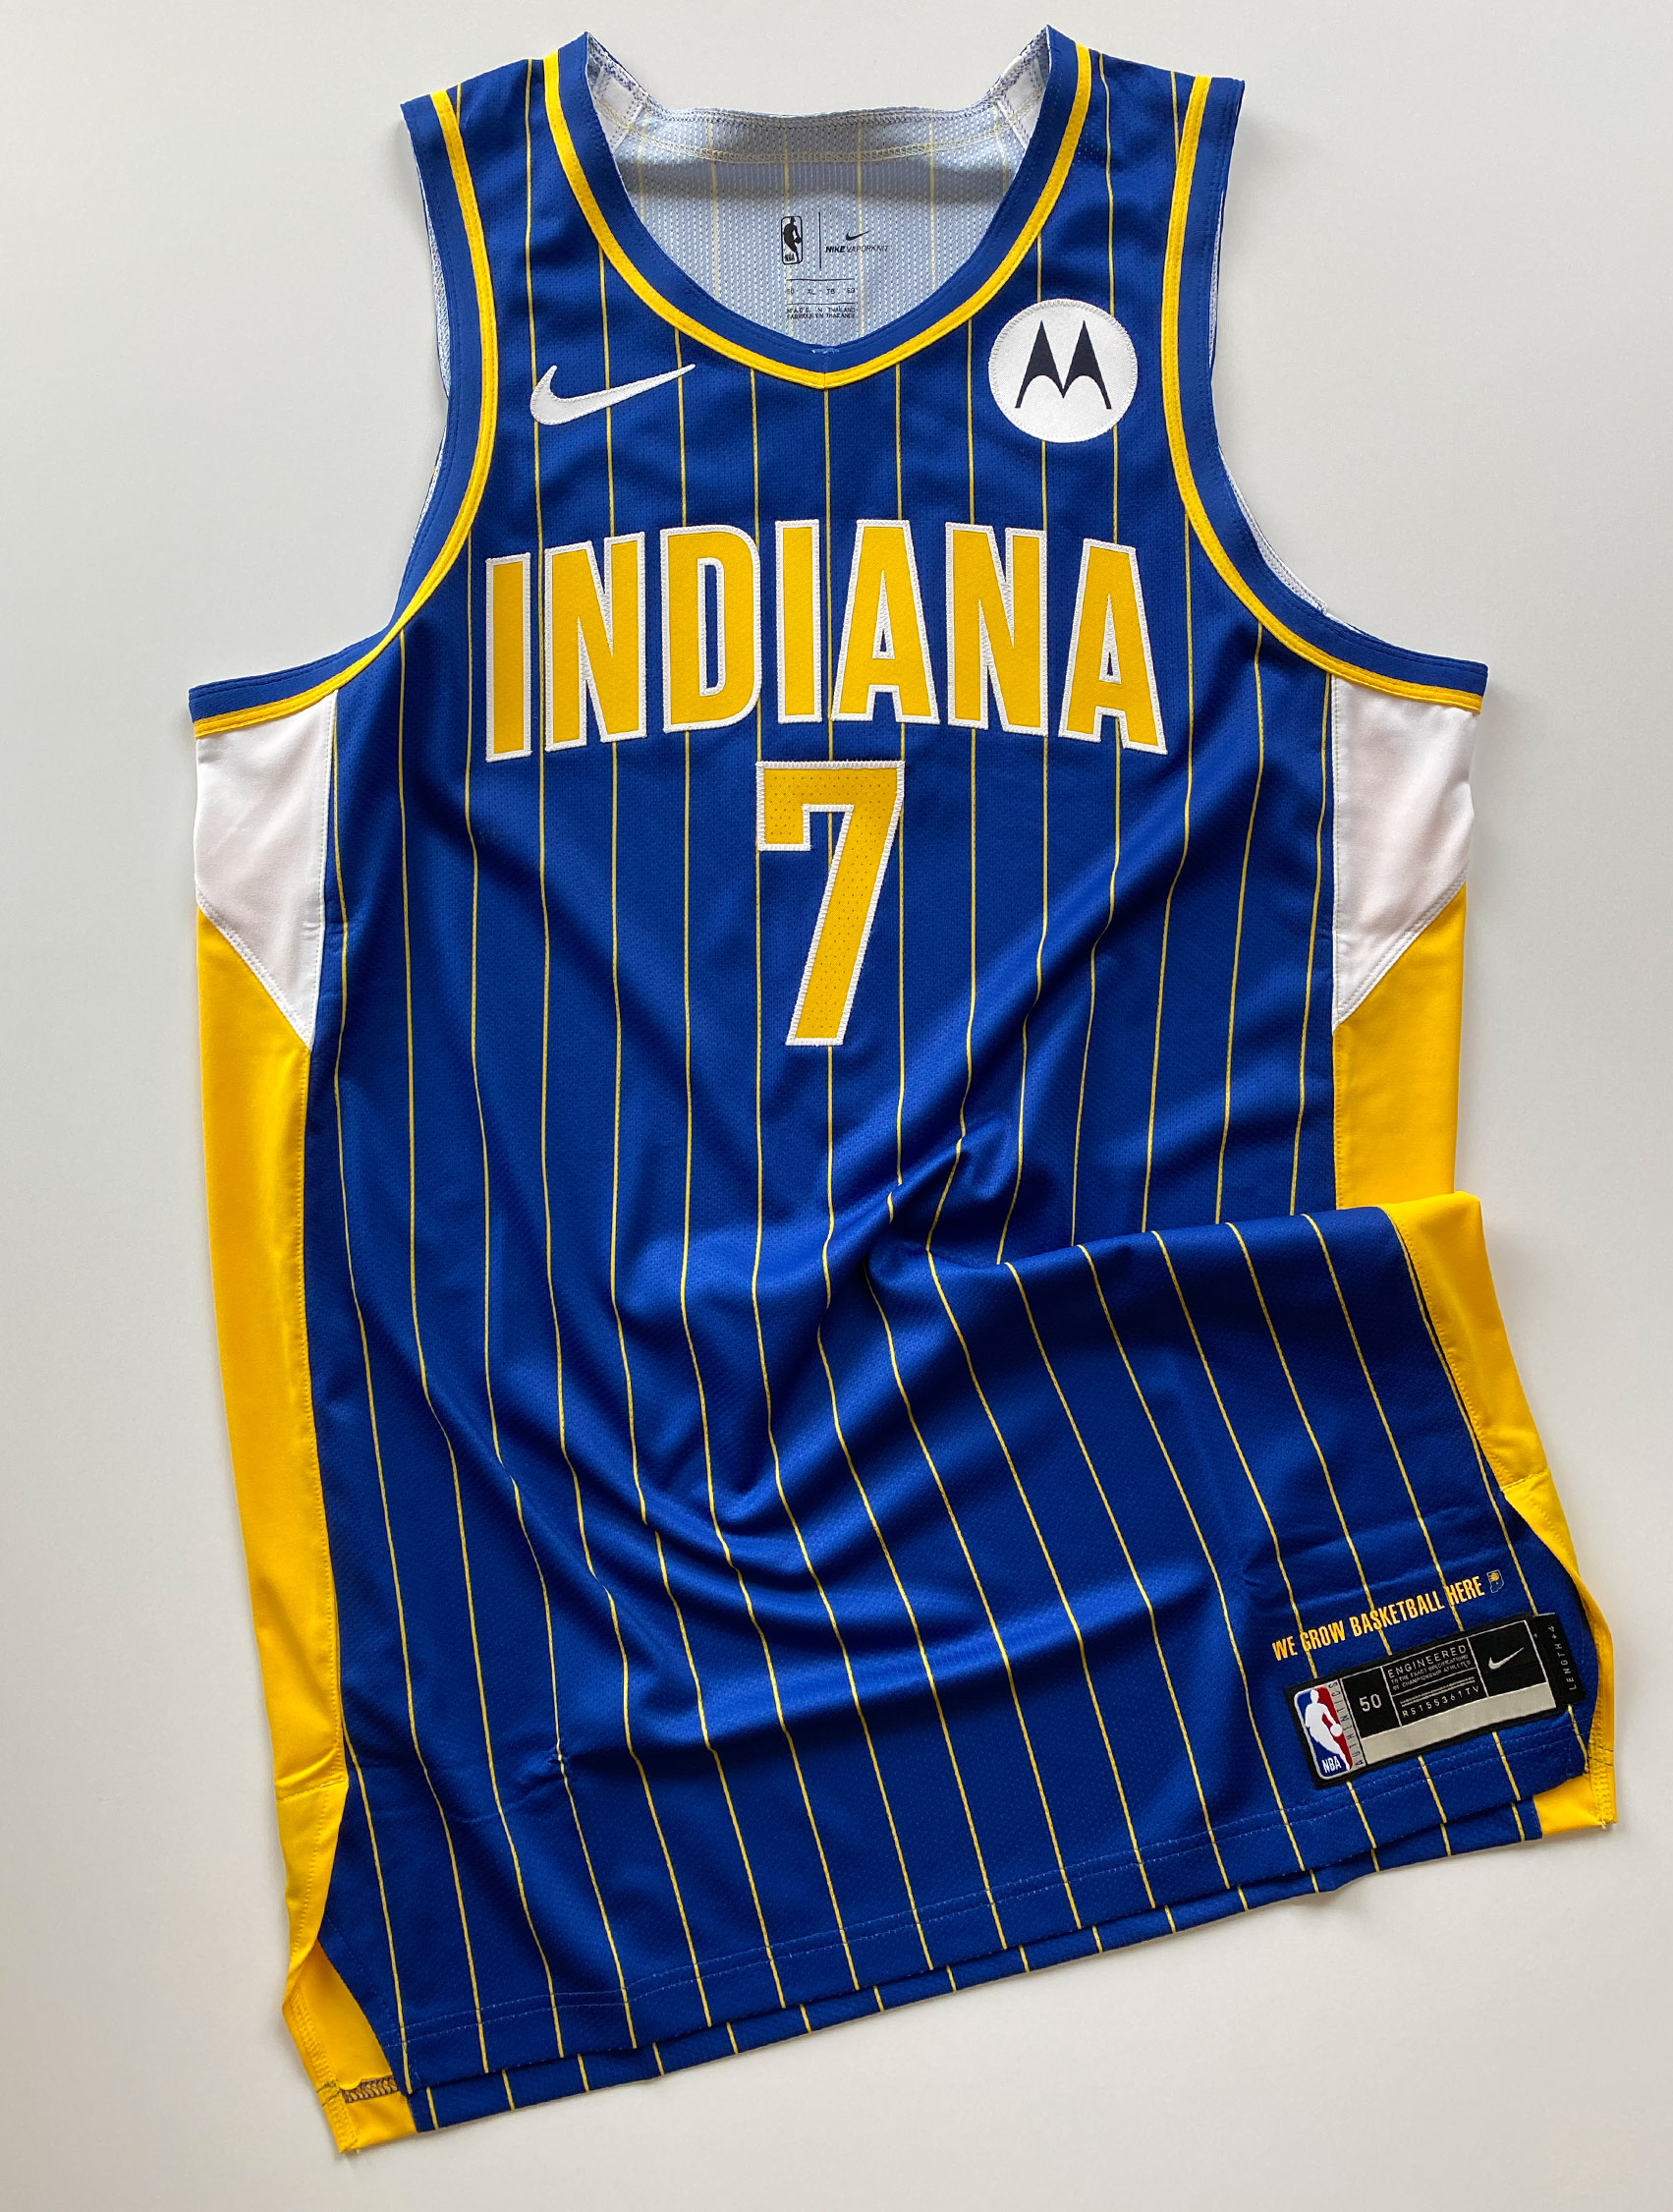 The new City Edition Jersey of the 2020-21 NBA teams